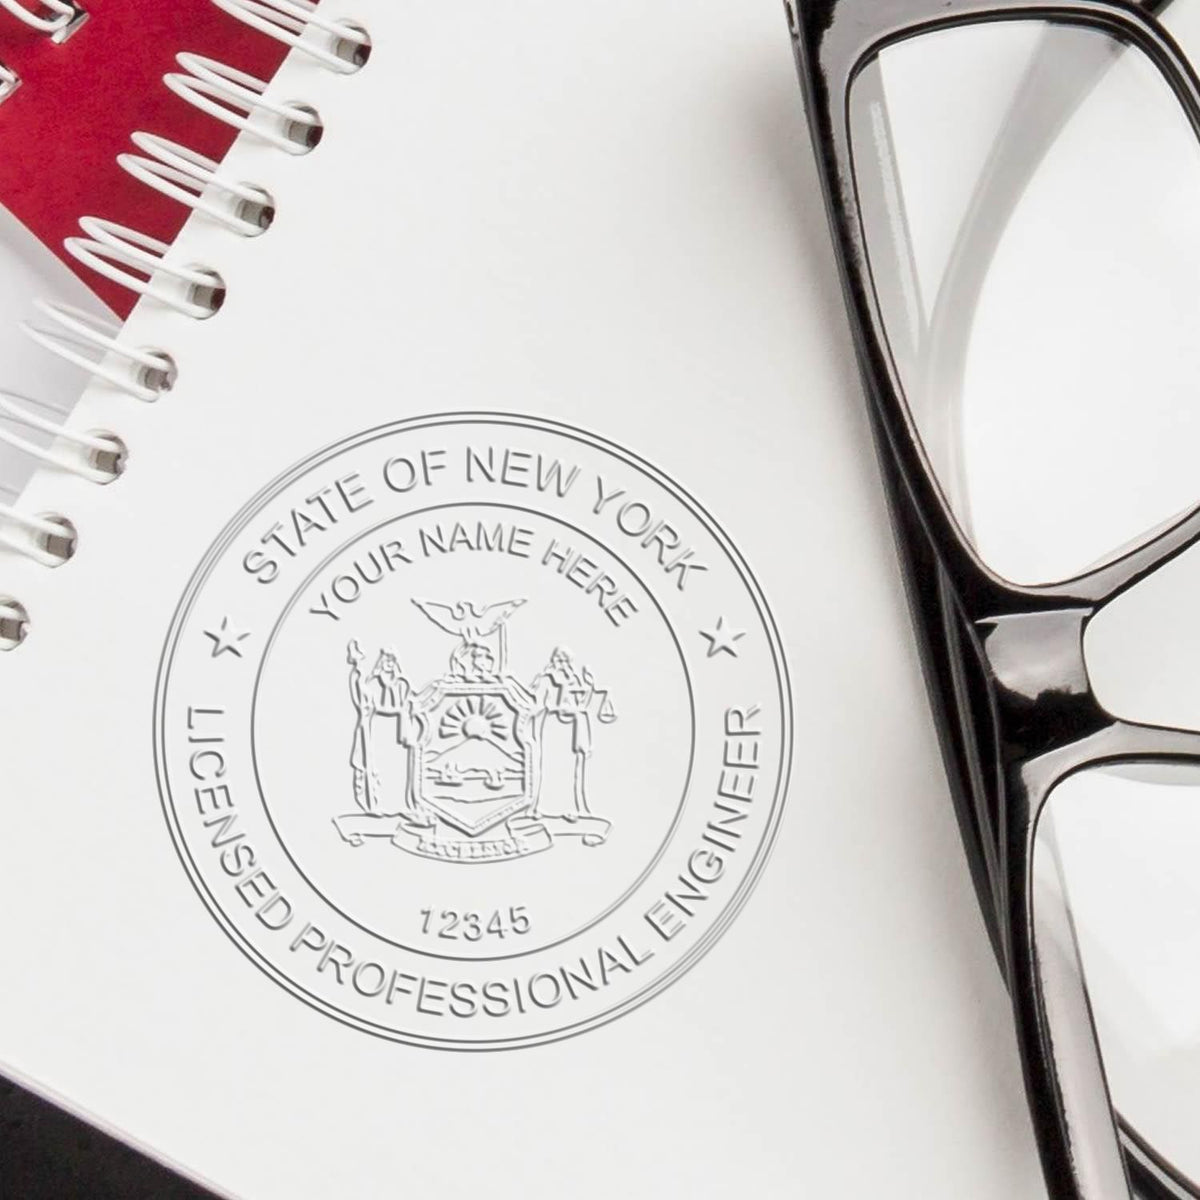 A photograph of the New York Engineer Desk Seal stamp impression reveals a vivid, professional image of the on paper.